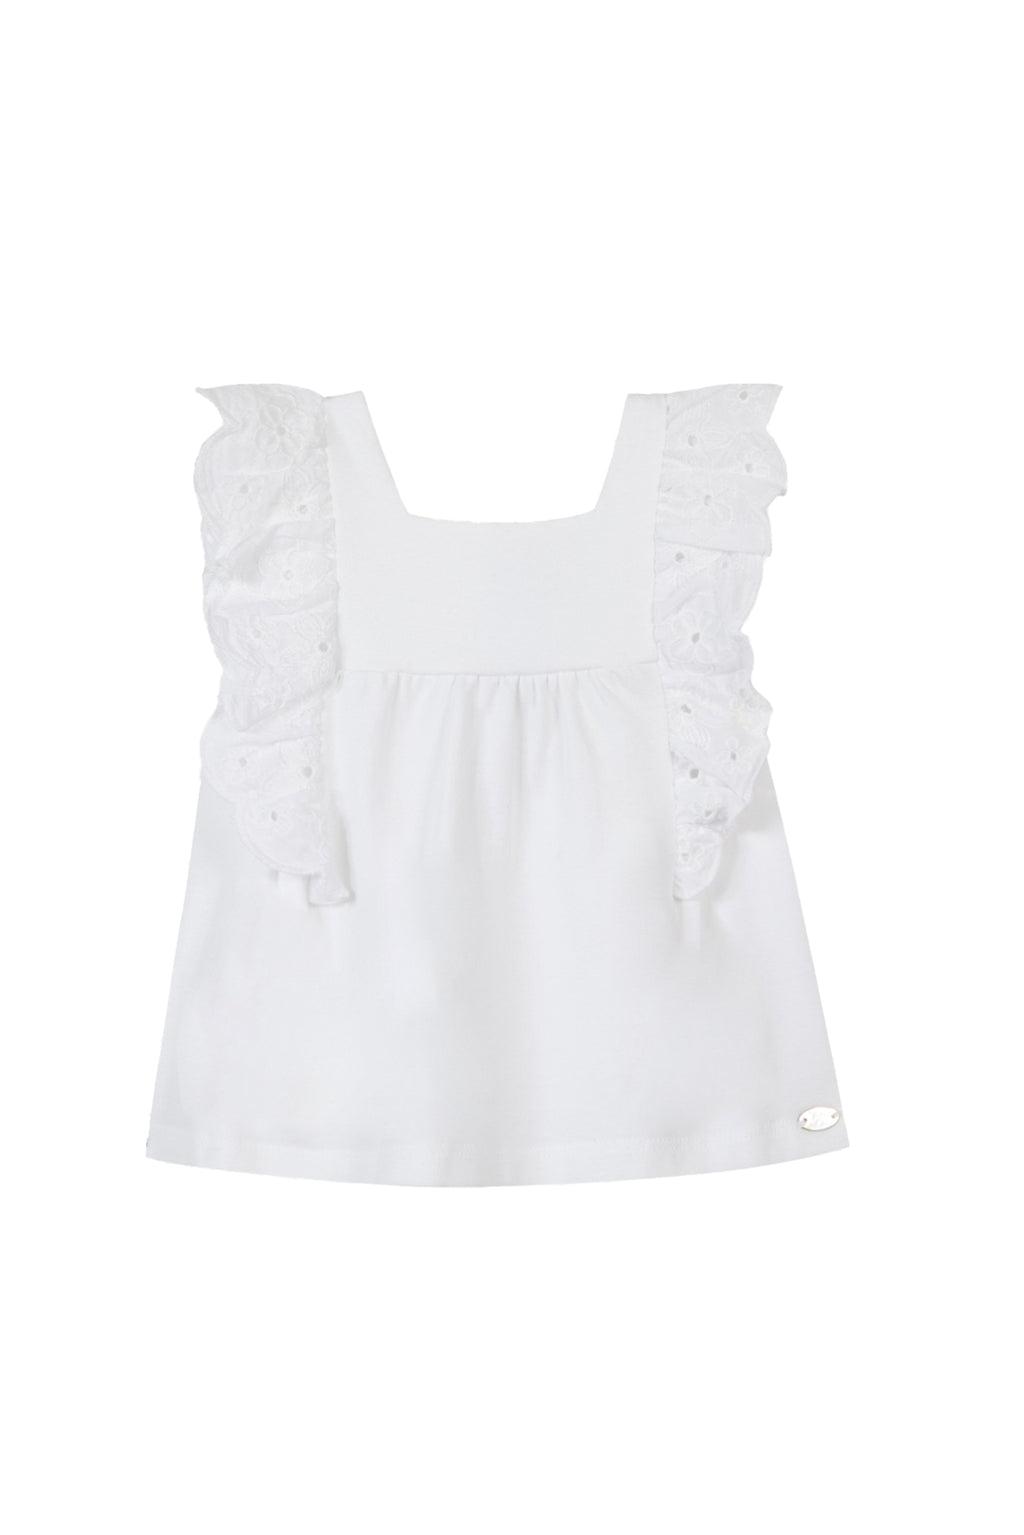 T-shirt - Blanc broderie anglaise